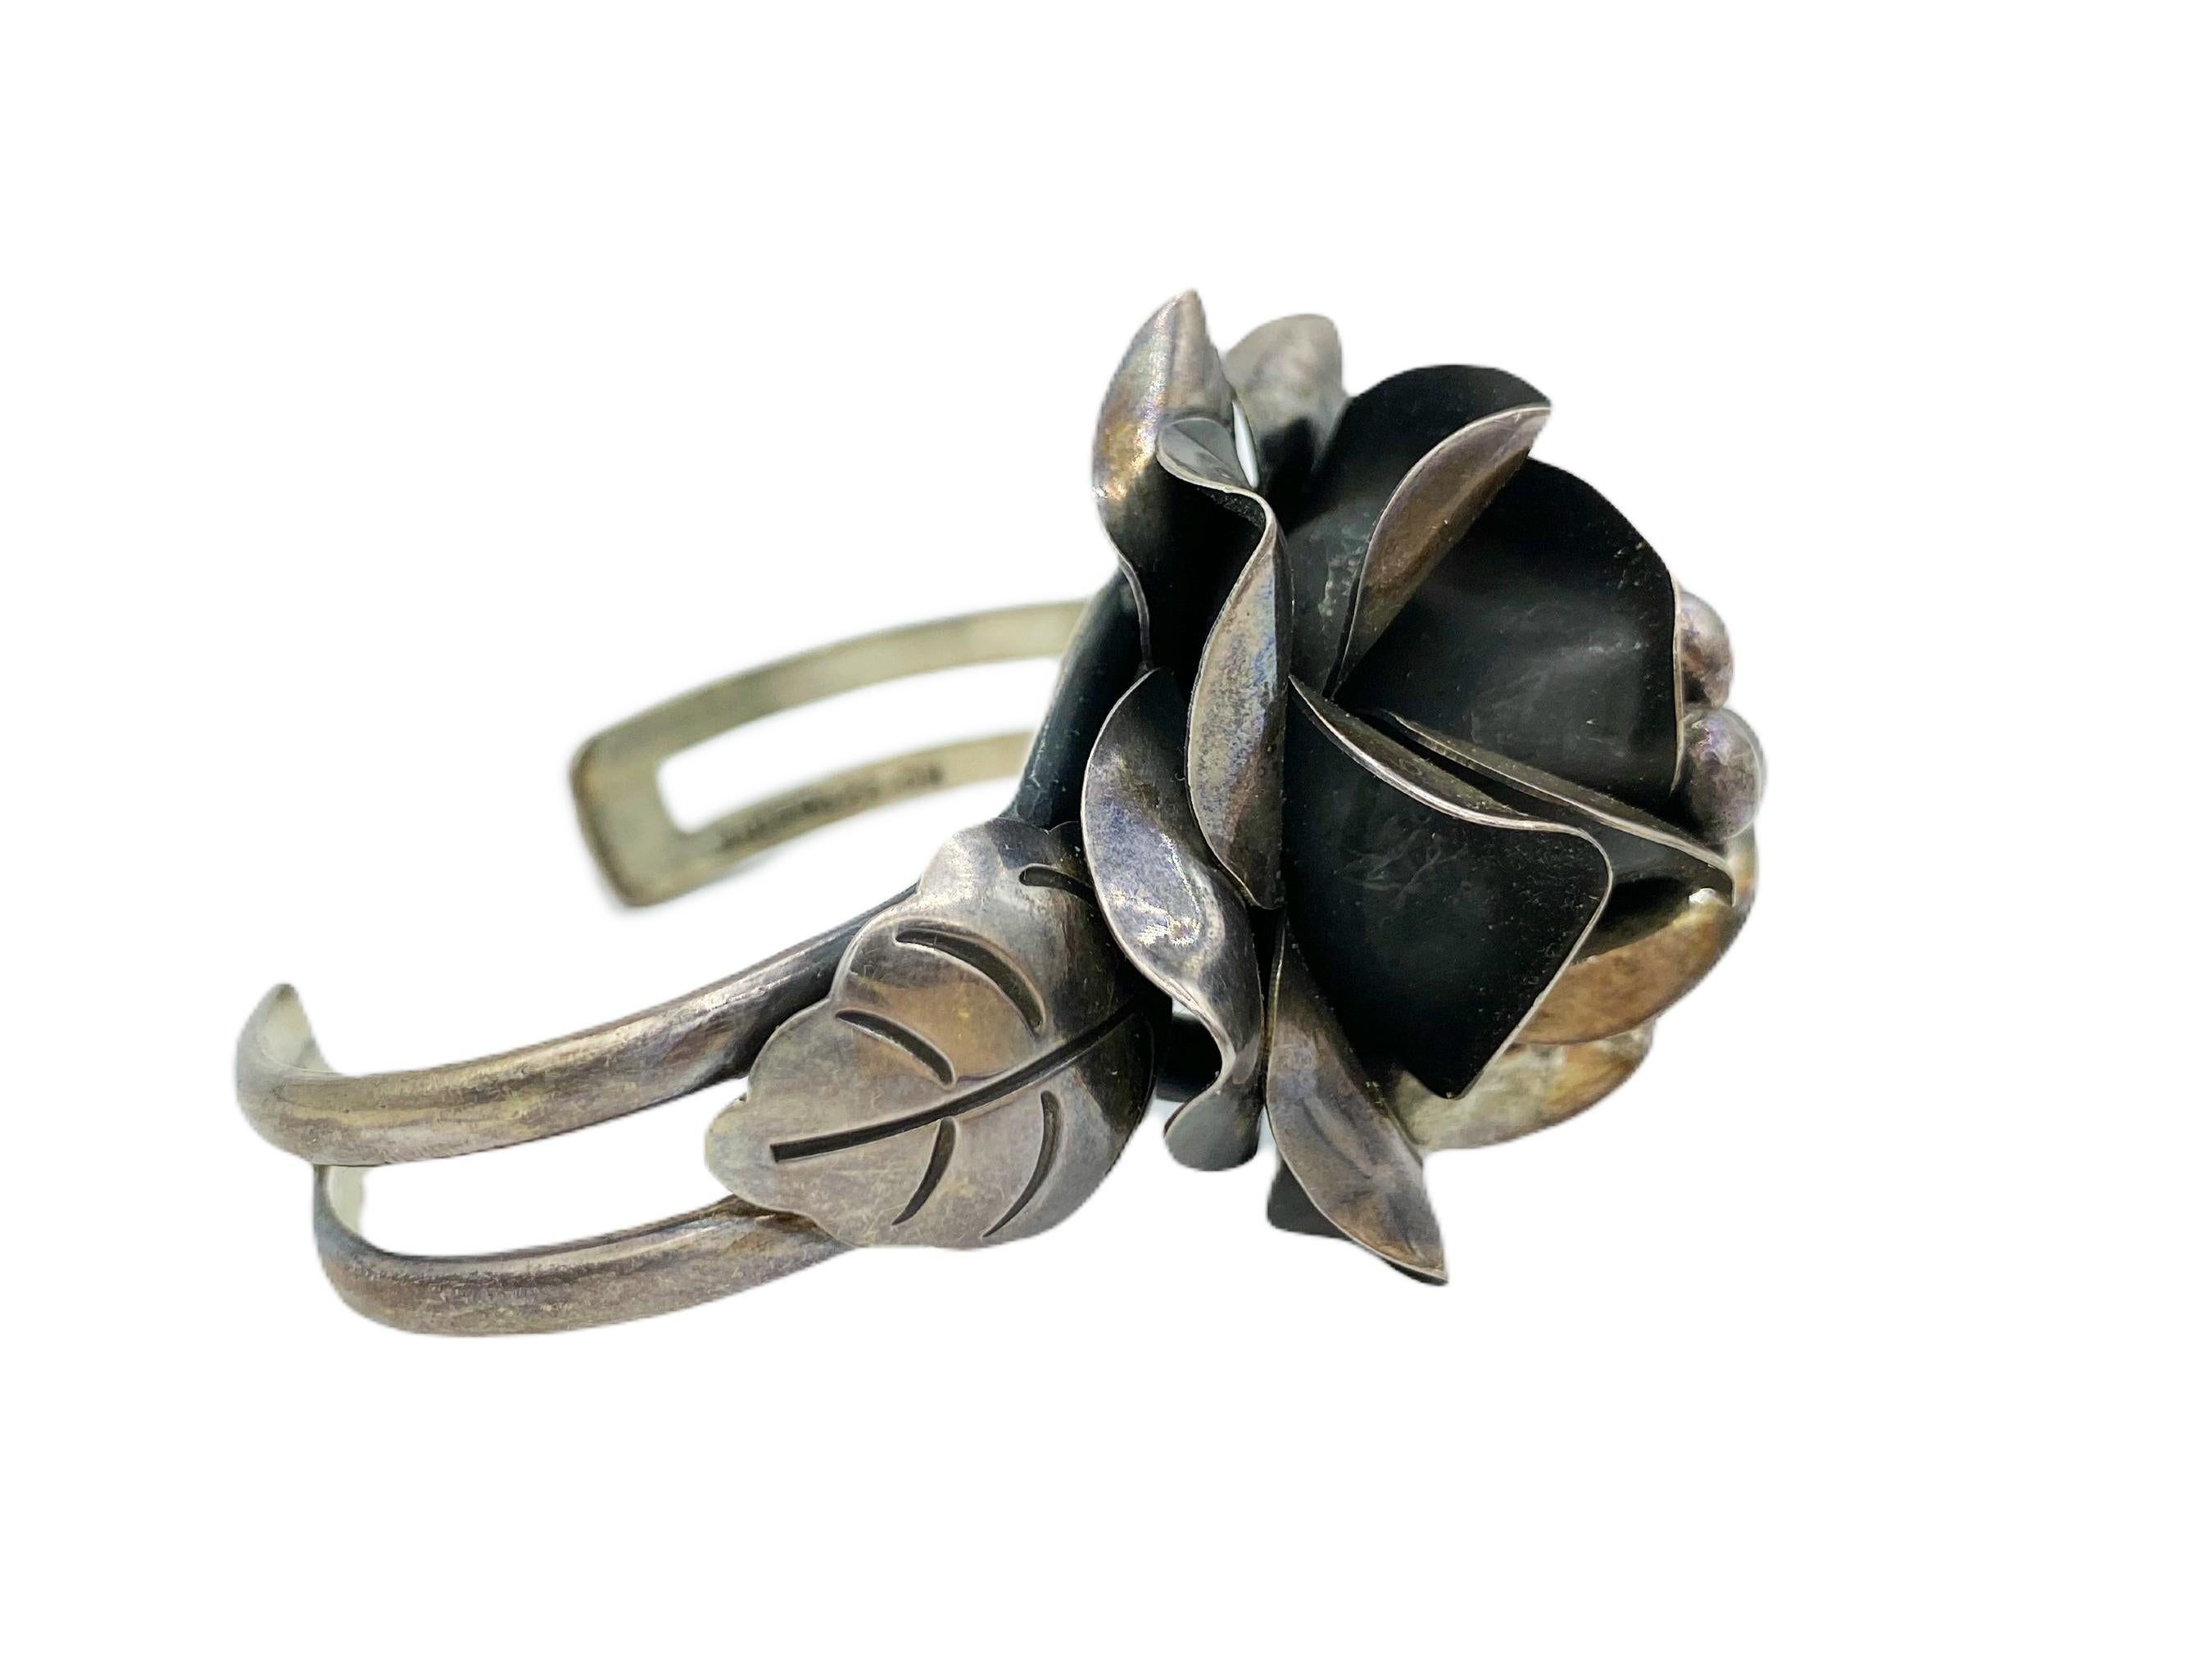 You'll love this remarkable Vintage Sterling Silver Rose 3-Dimensional Flower Mexico Statement Cuff Bracelet, a wearable work of art that showcases the beauty of Mexican silver craftsmanship. Handmade with meticulous attention to detail, this cuff